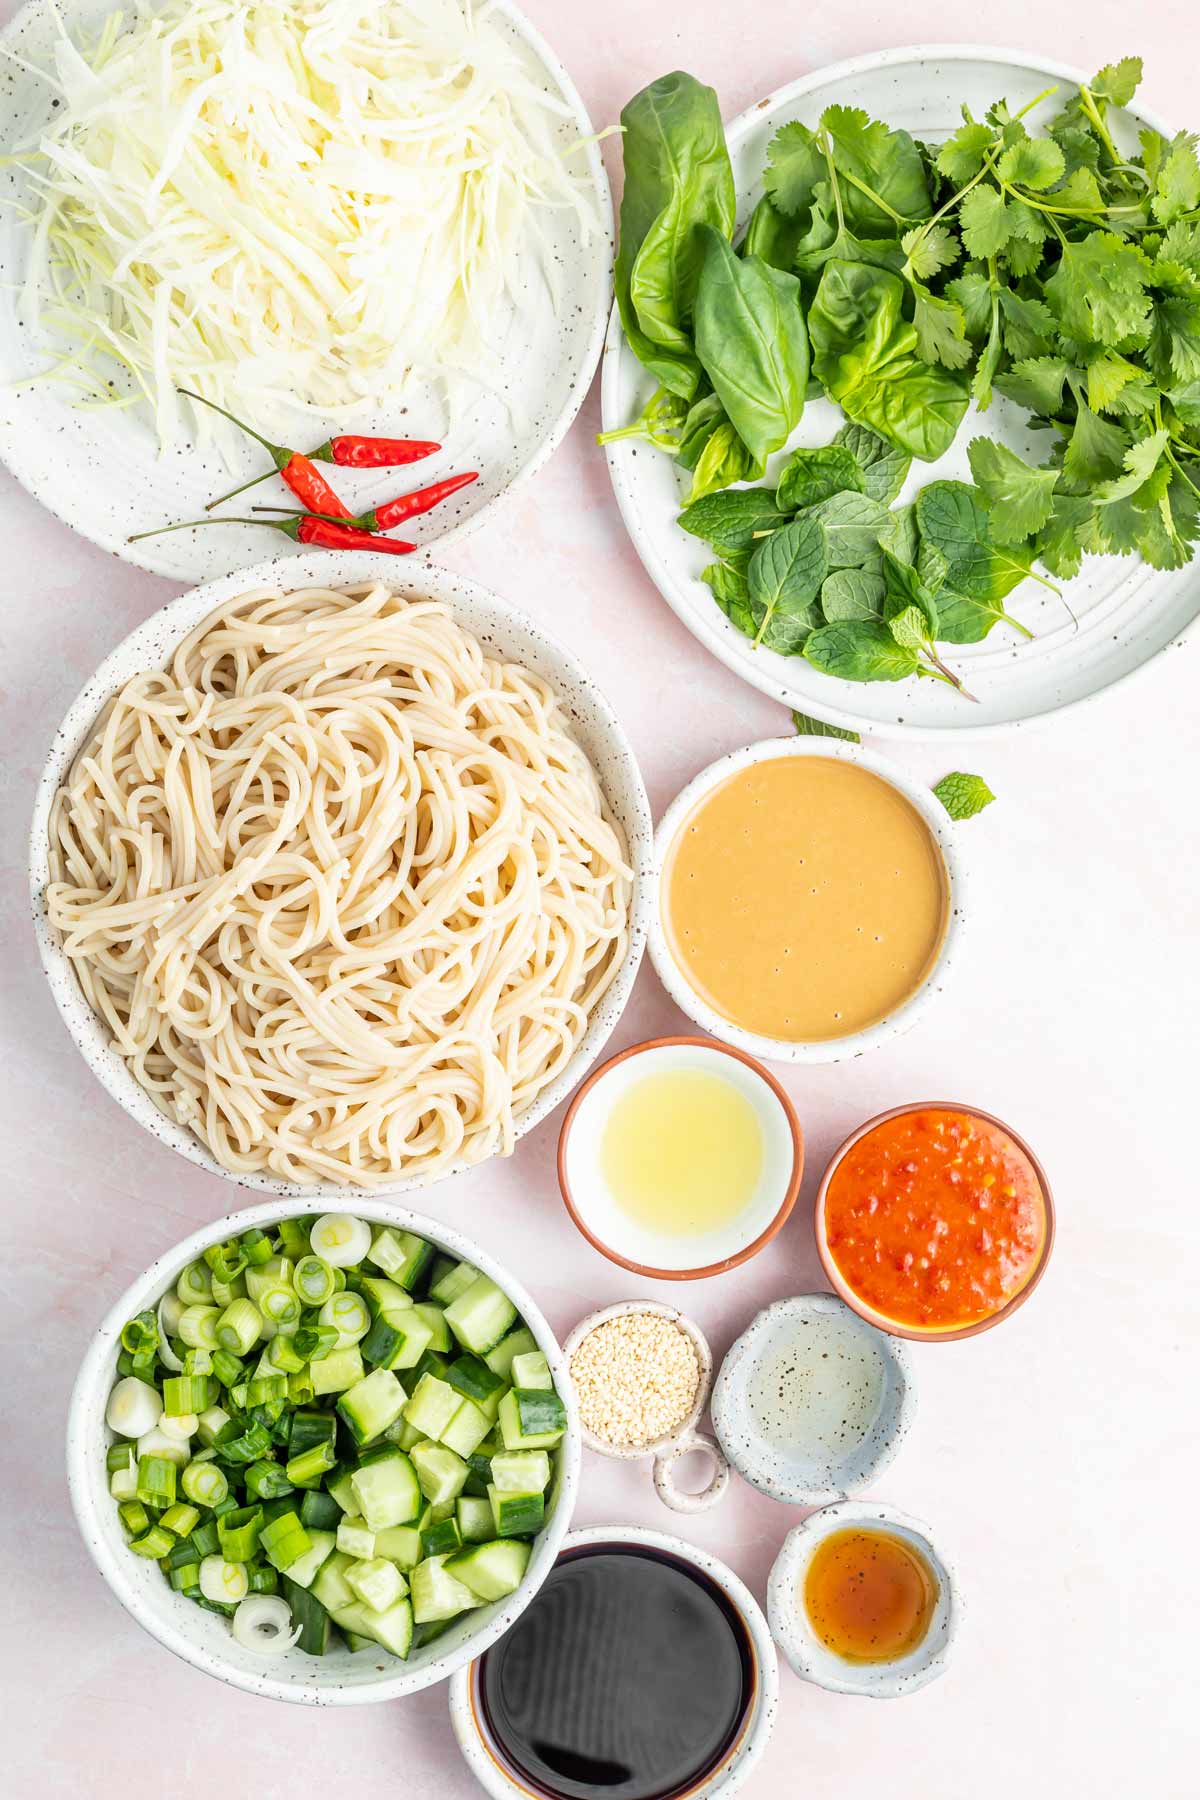 ingredients for spicy udon noodles.